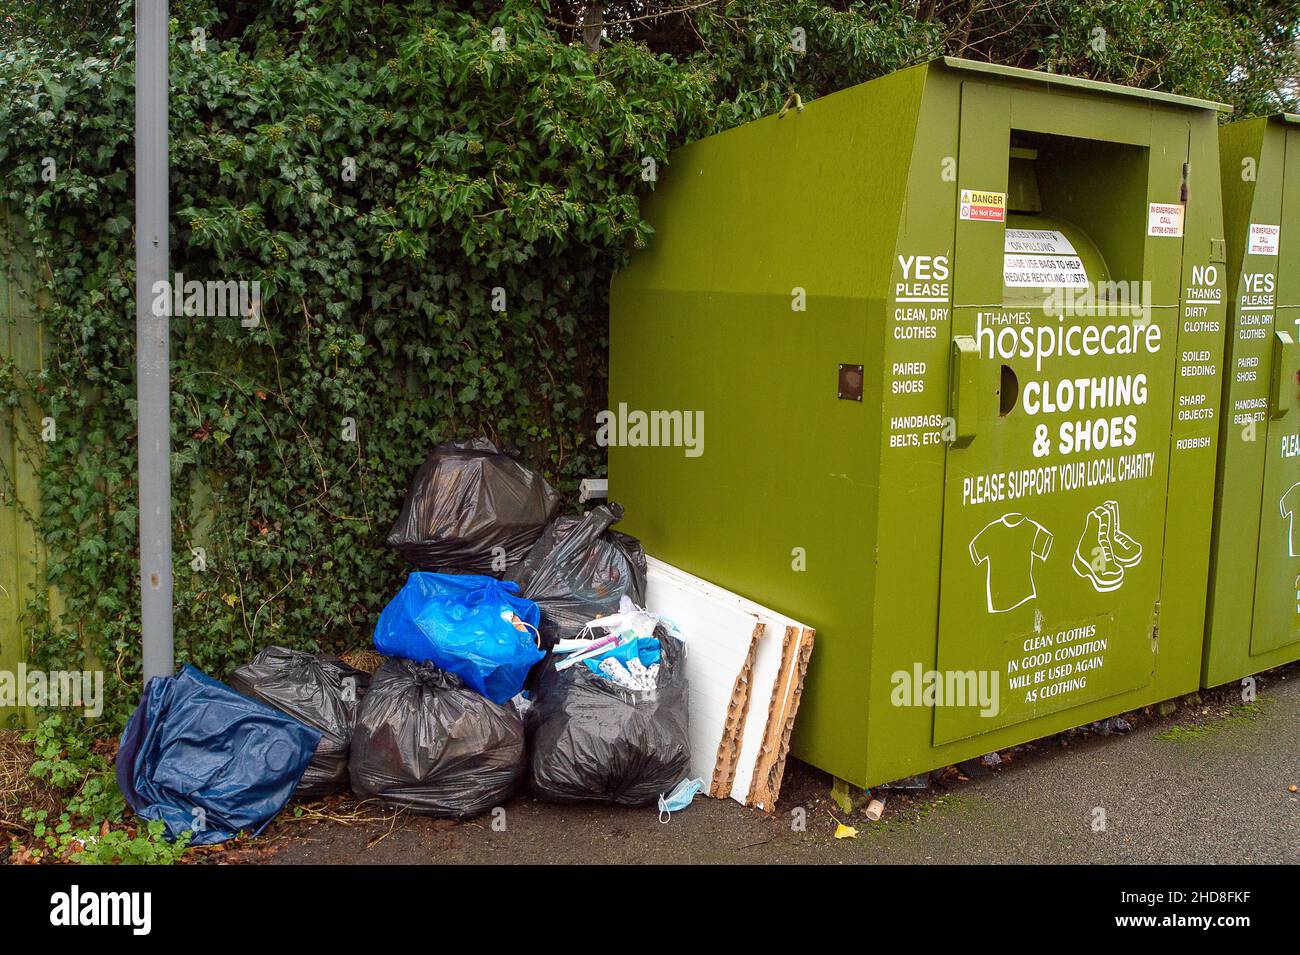 Windsor, Berkshire, UK. 4th January, 2022. Despite waste collection services in Windsor working as normal post the Christmas holidays, some people are still choosing to illegally fly tip their rubbish next to charity collection points. Credit: Maureen McLean/Alamy Stock Photo